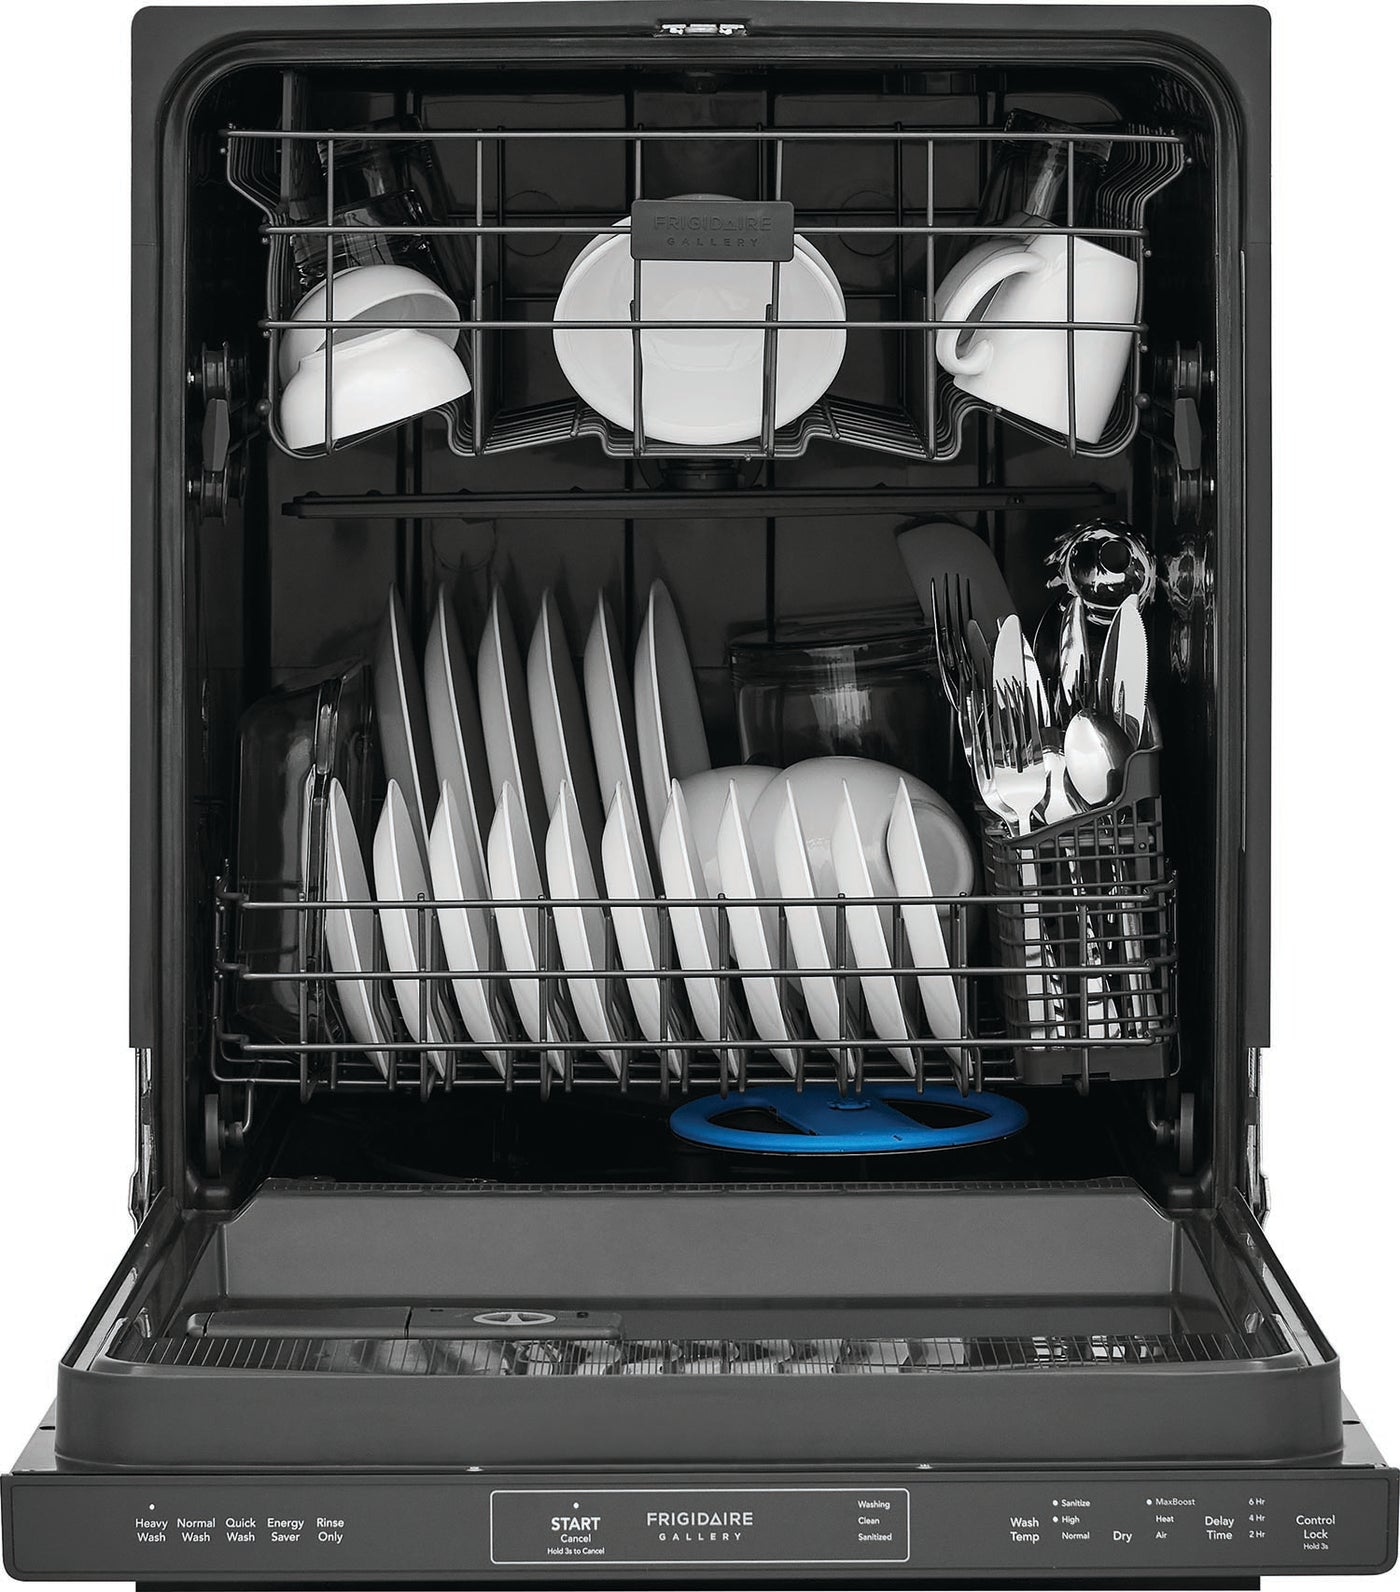 Frigidaire Gallery Smudge-Proof Stainless Steel 24" Built-In Dishwasher - GDPP4515AF